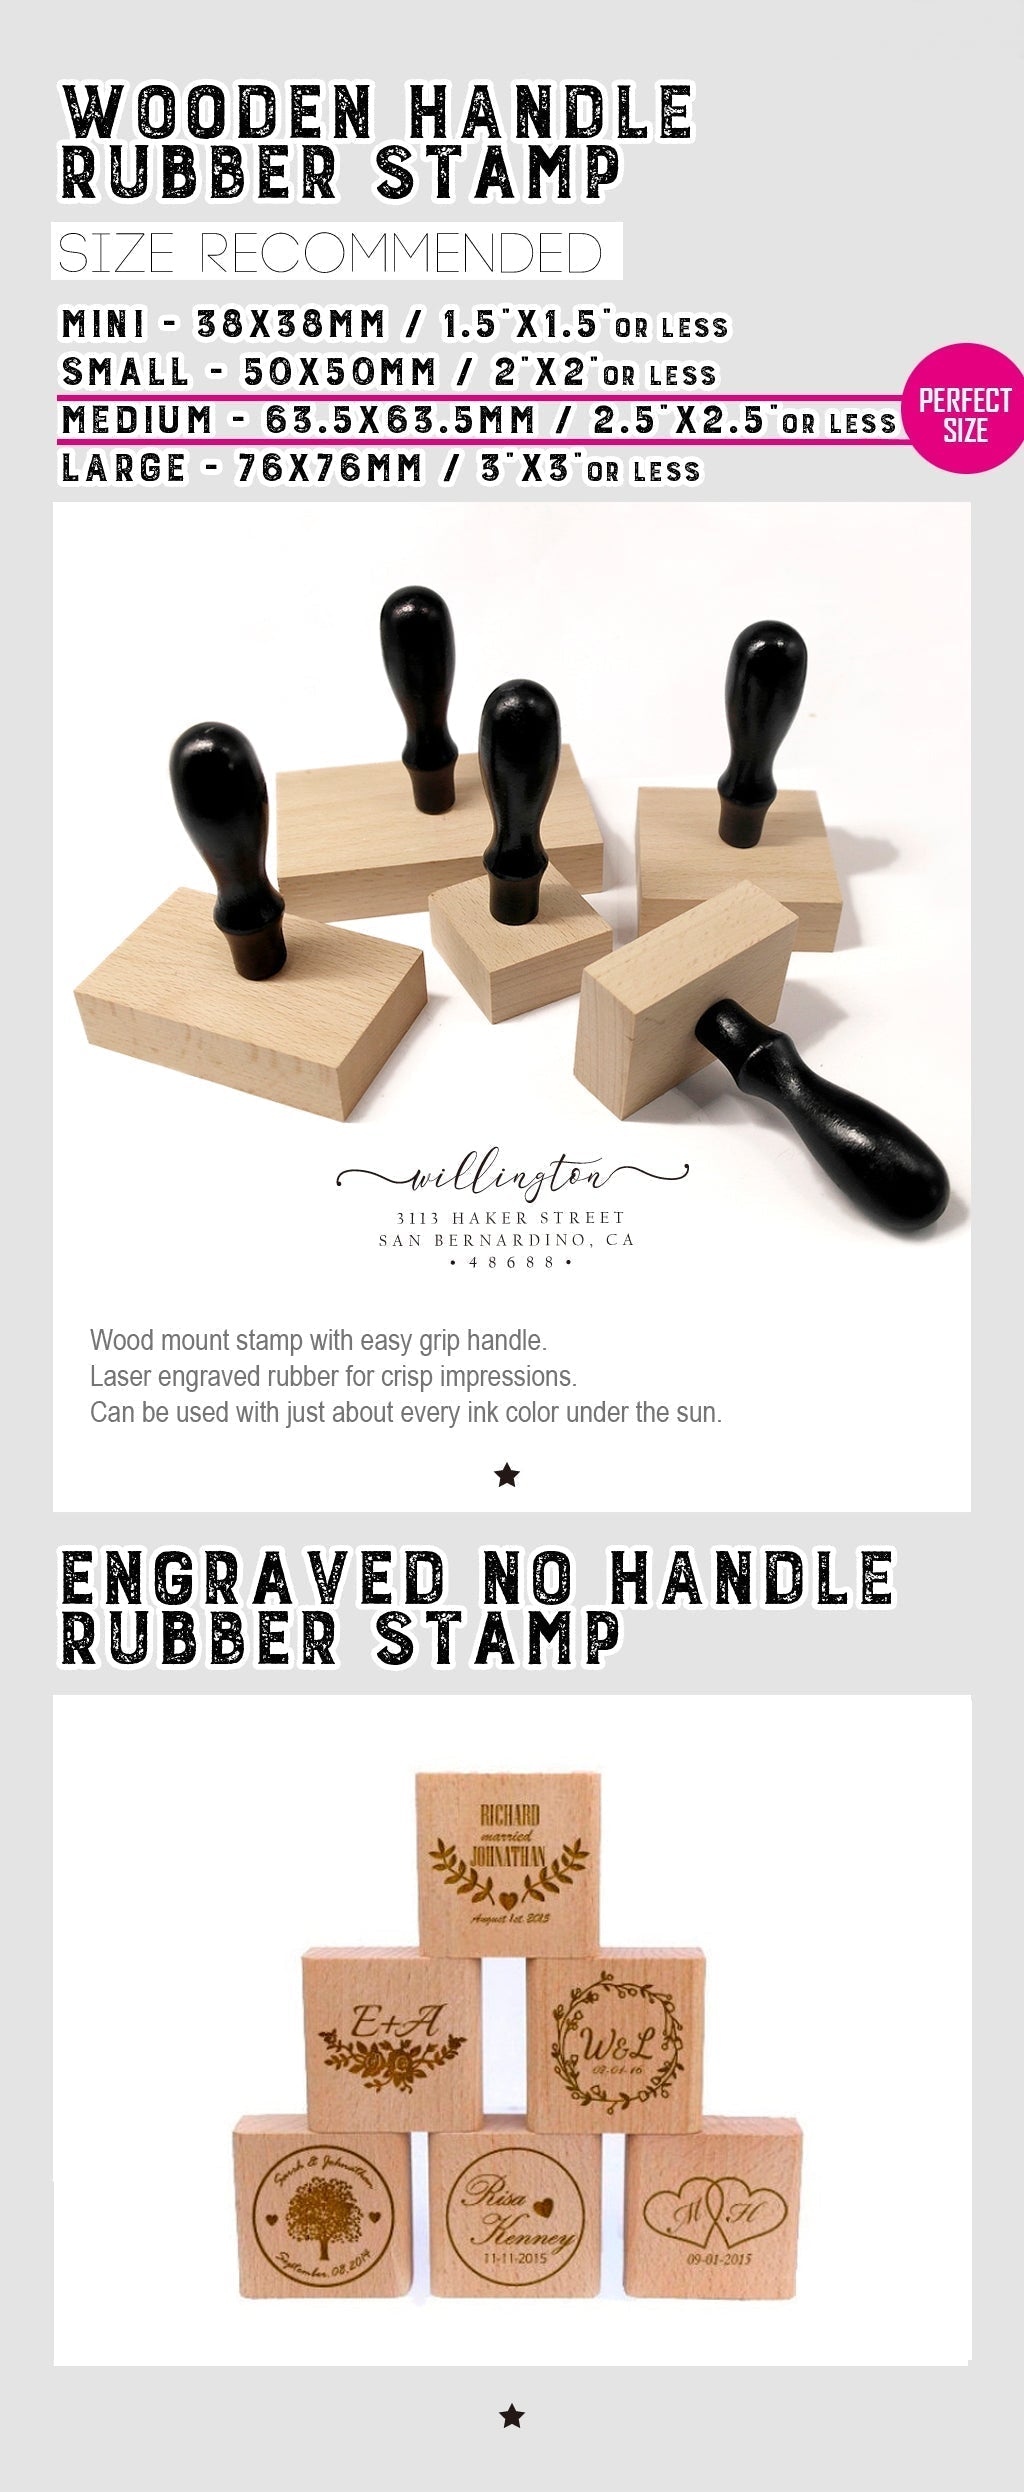 A sample to tell what's difference of wooden handle rubber stamp and engraved no handle rubber stamp, and their feature.